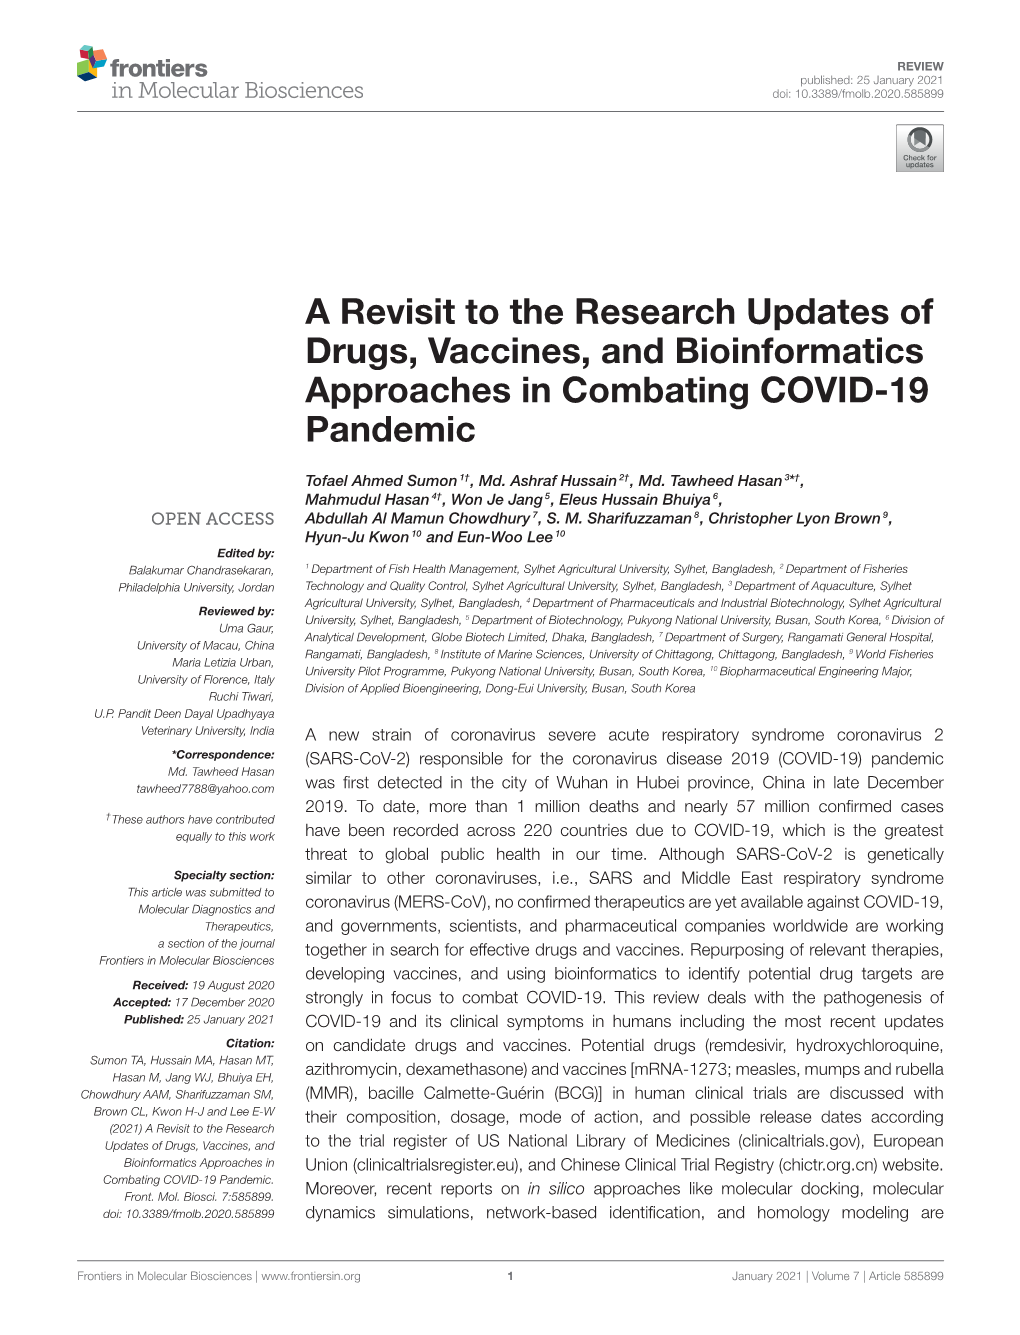 A Revisit to the Research Updates of Drugs, Vaccines, and Bioinformatics Approaches in Combating COVID-19 Pandemic